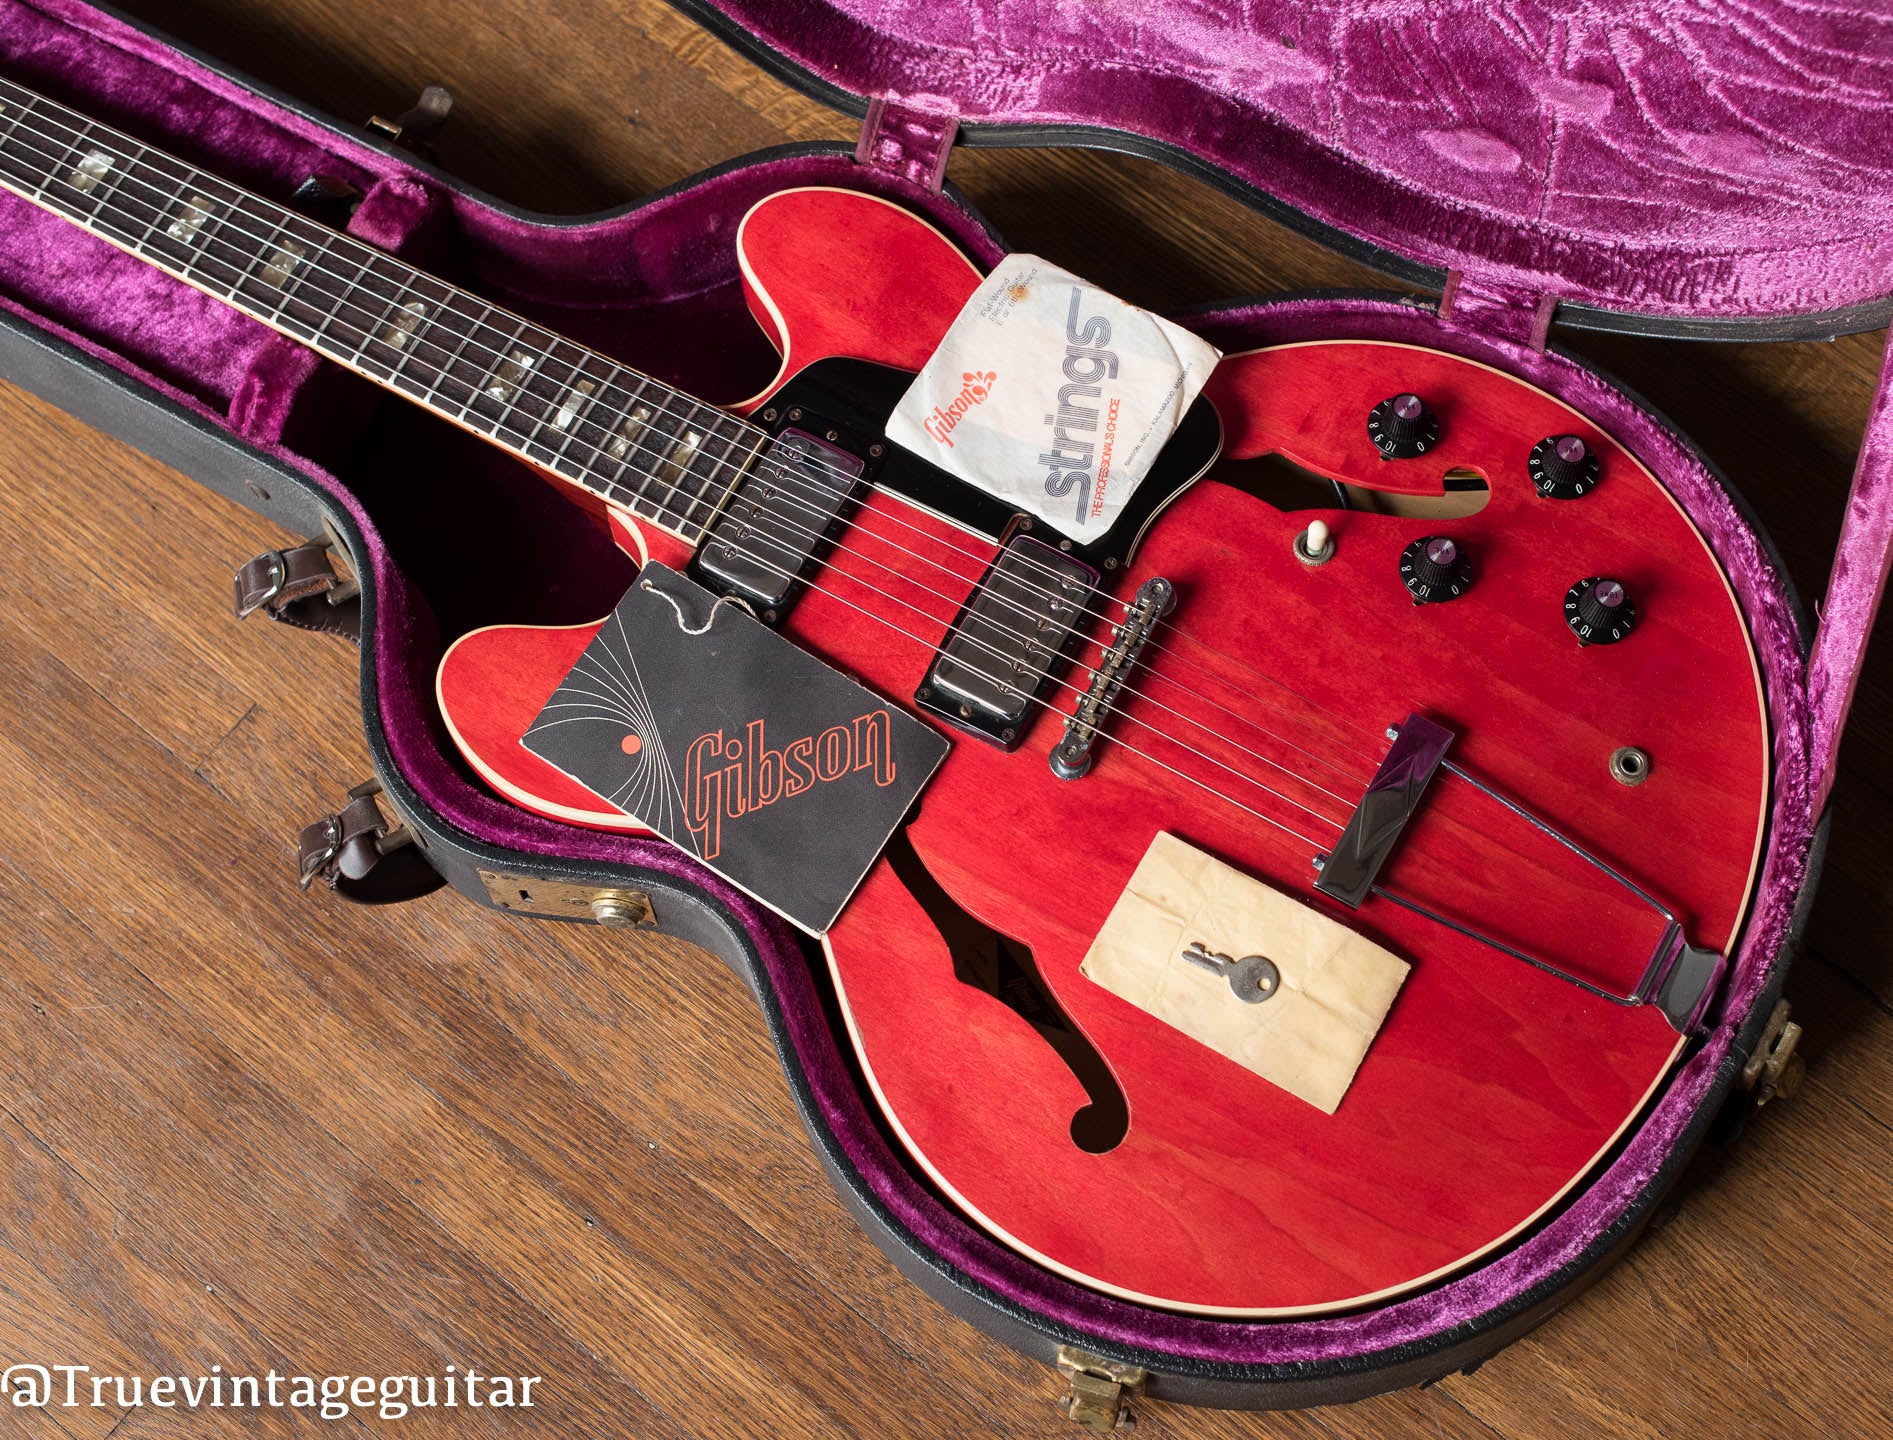 Vintage 1974 Gibson ES-335 Cherry Red with hang tag